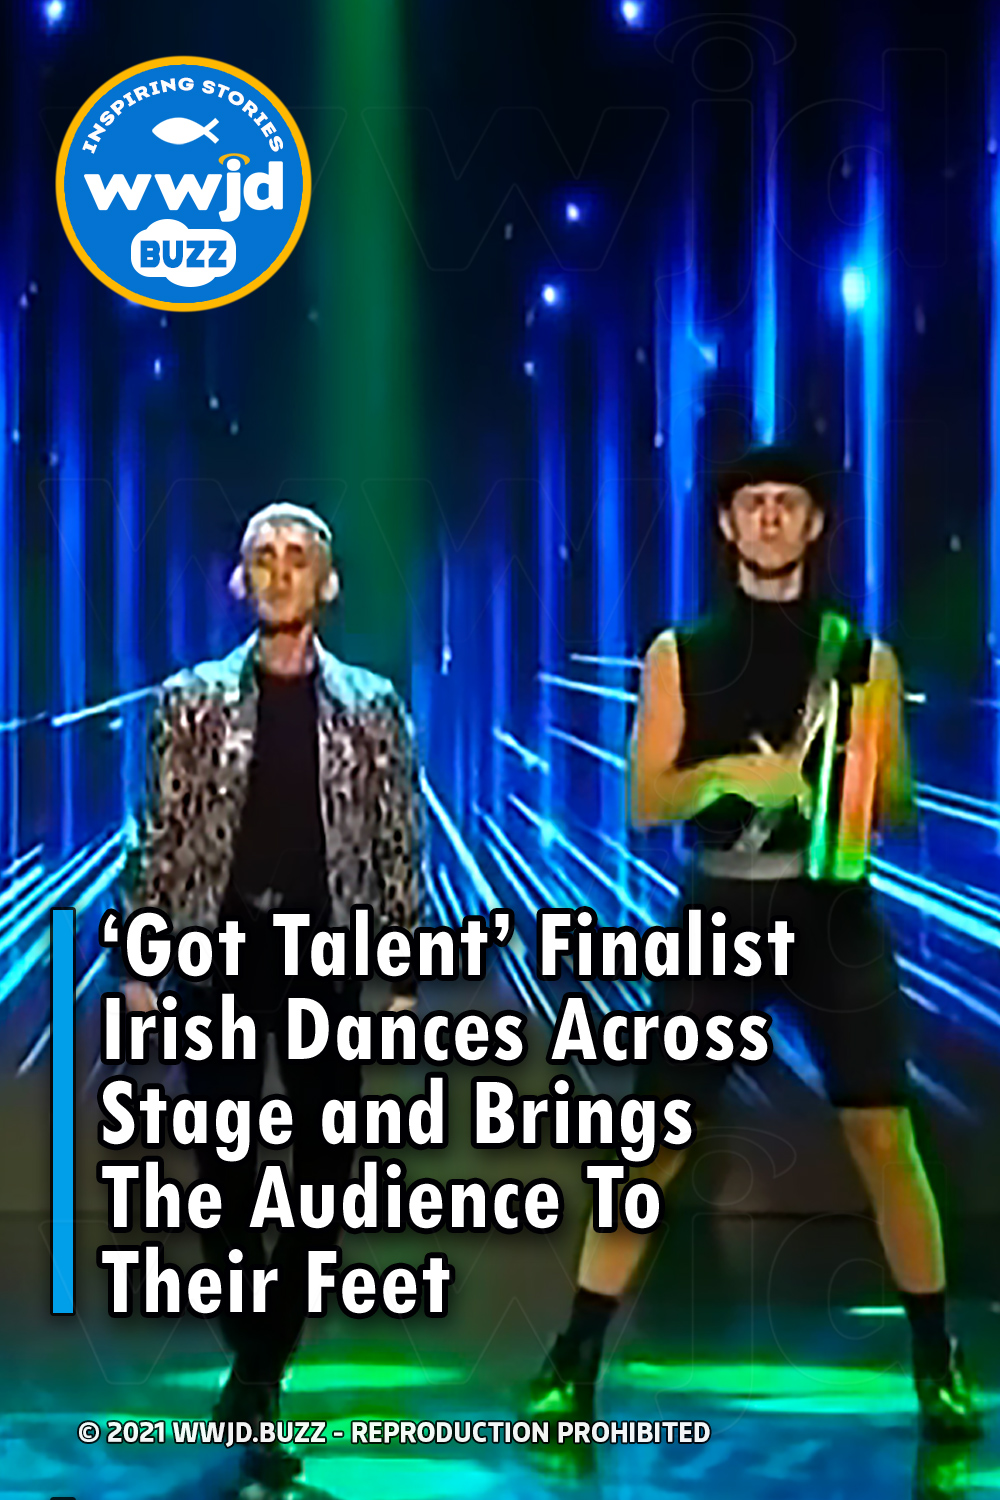 \'Got Talent\' Finalist Irish Dances Across Stage and Brings The Audience To Their Feet